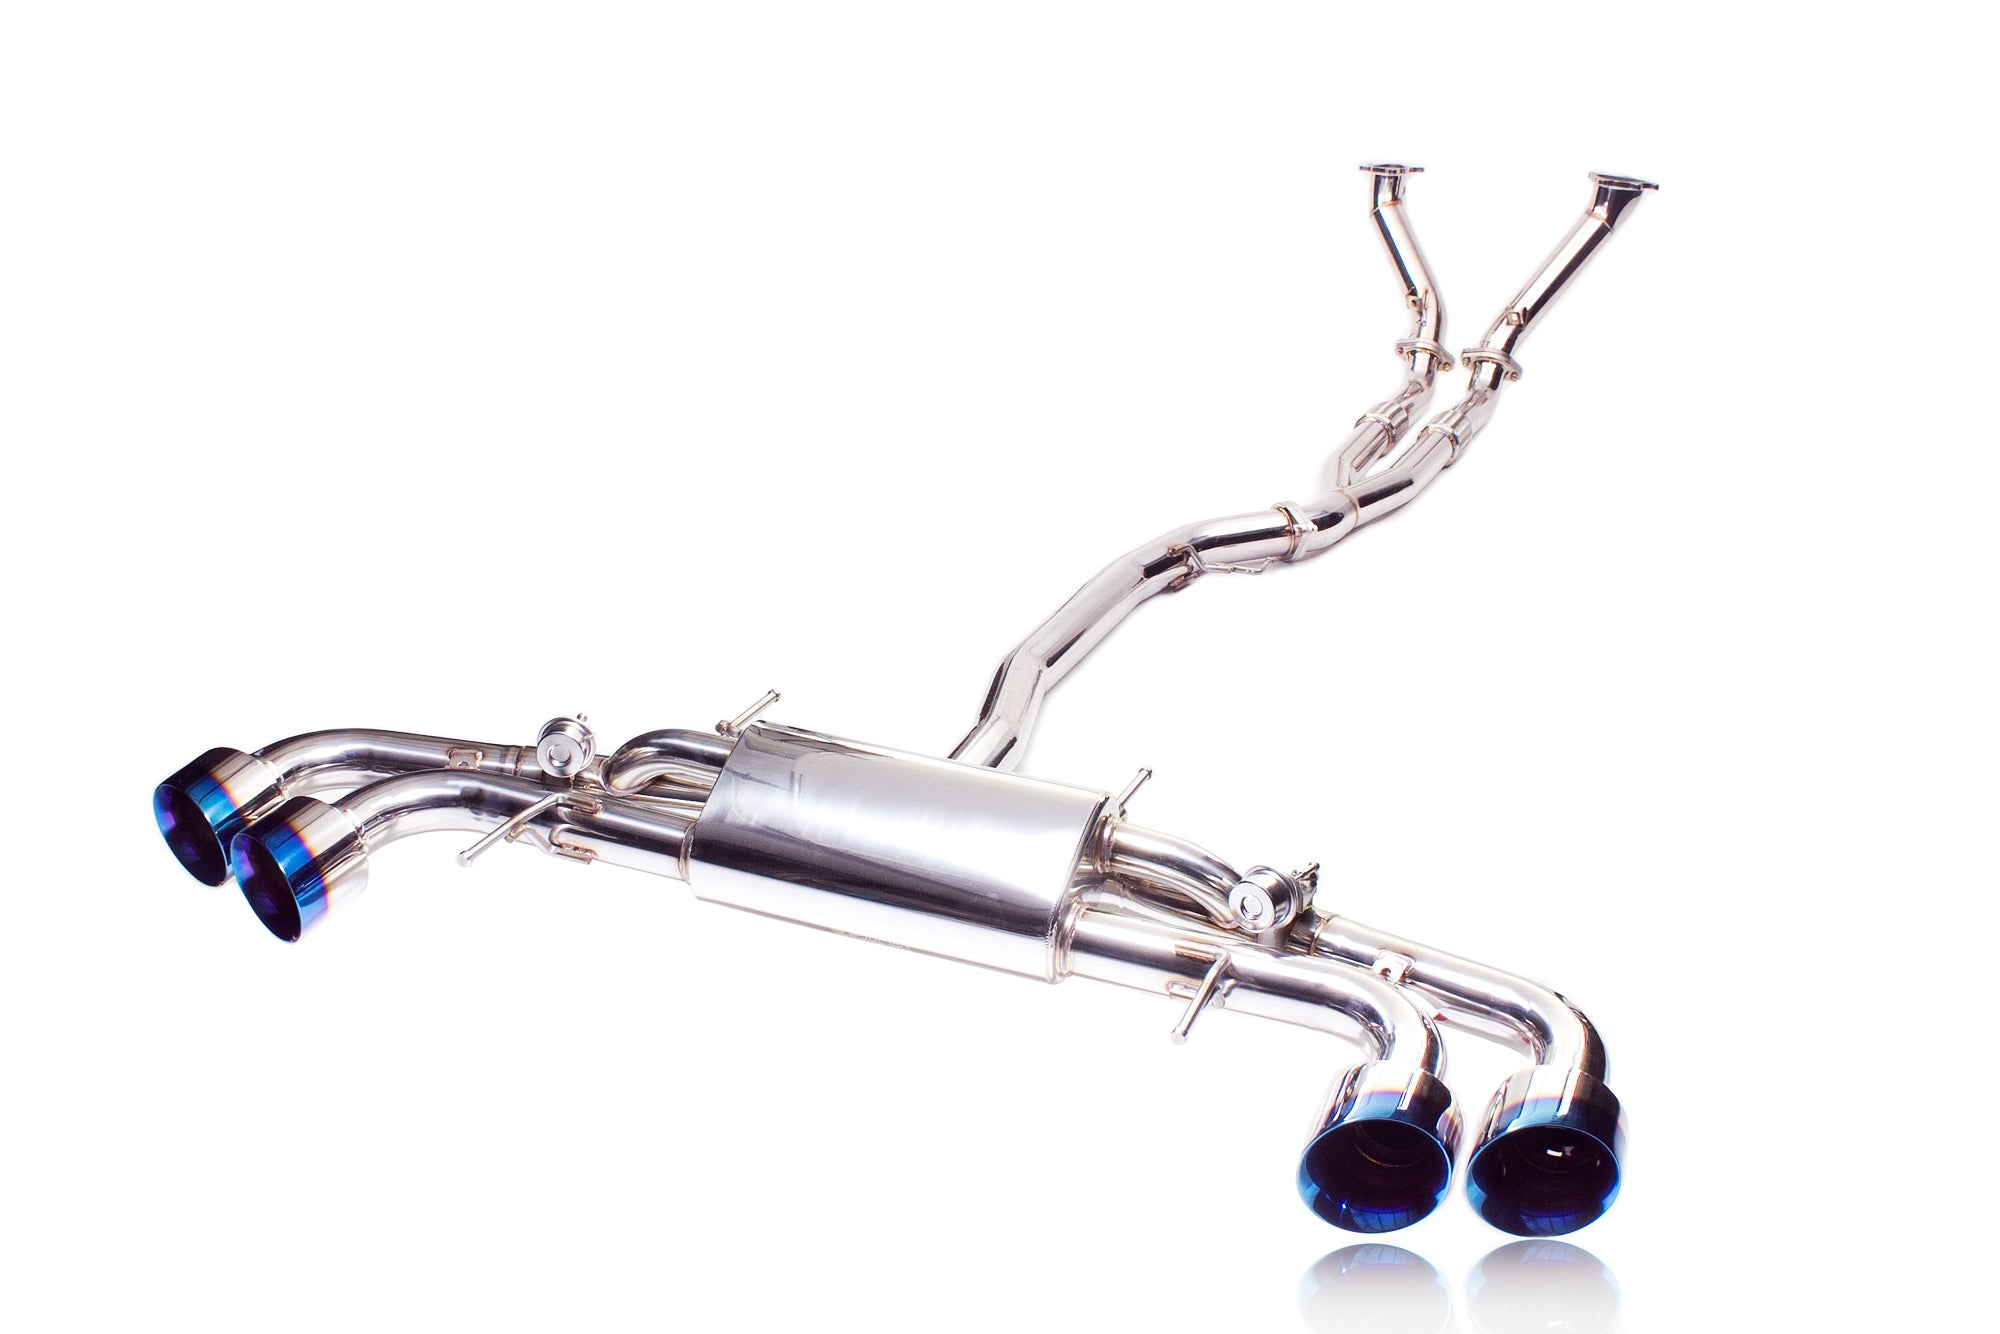 iPE - Valvetronic Exhaust w/ Wired Remote & Ti Blue Tips suit Nissan GT-R (R35) (2007-Current) - MODE Auto Concepts